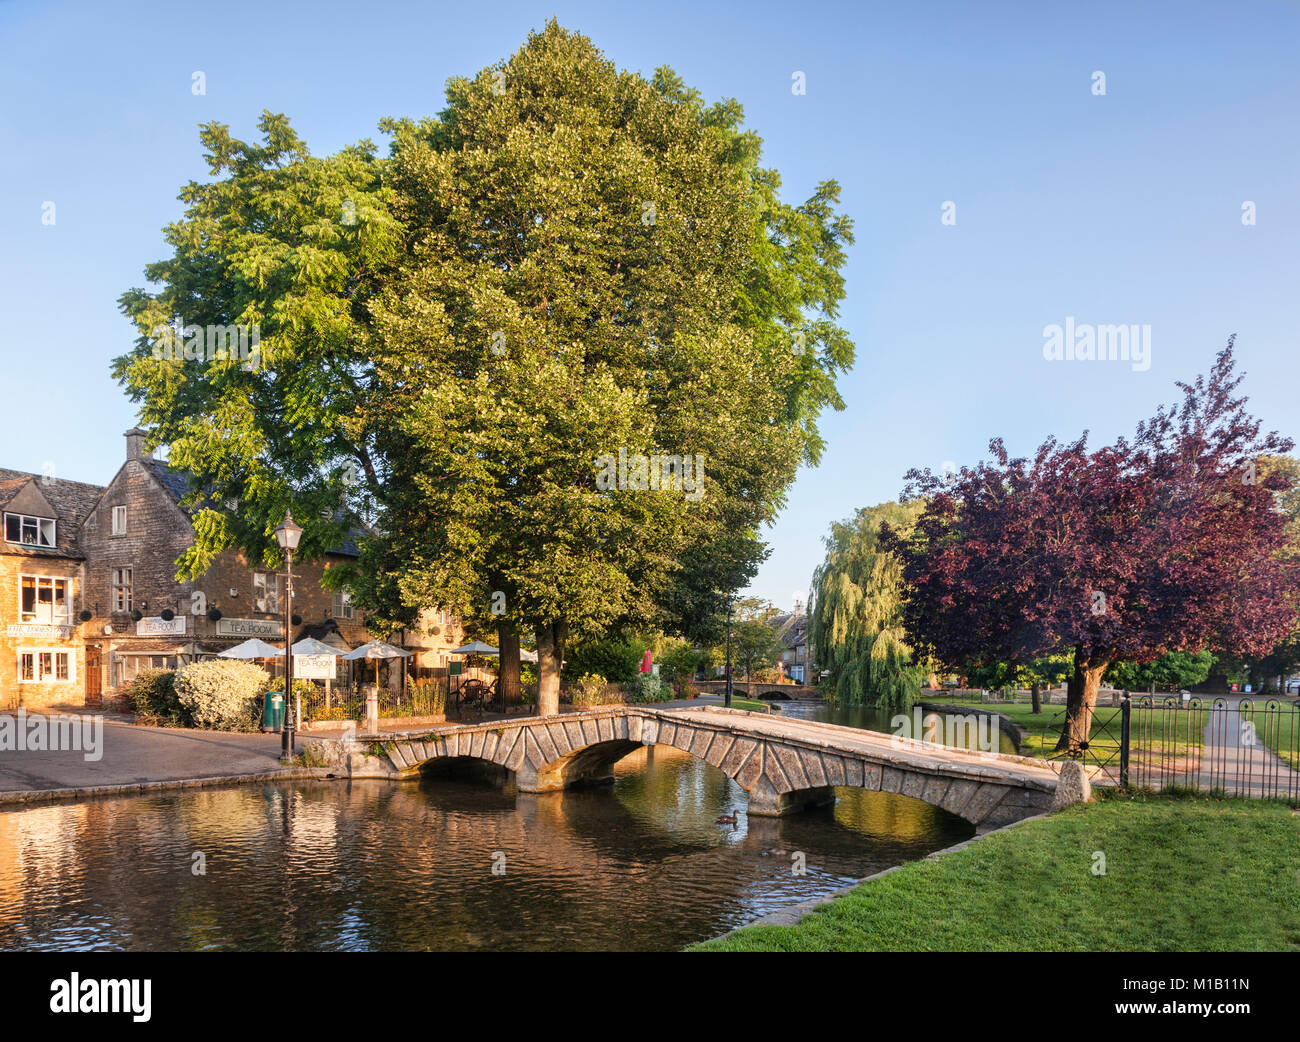 The famous bridge over the River Windrush in the Cotswolds village of Bourton-on-the-Water, Gloucestershire, England Stock Photo